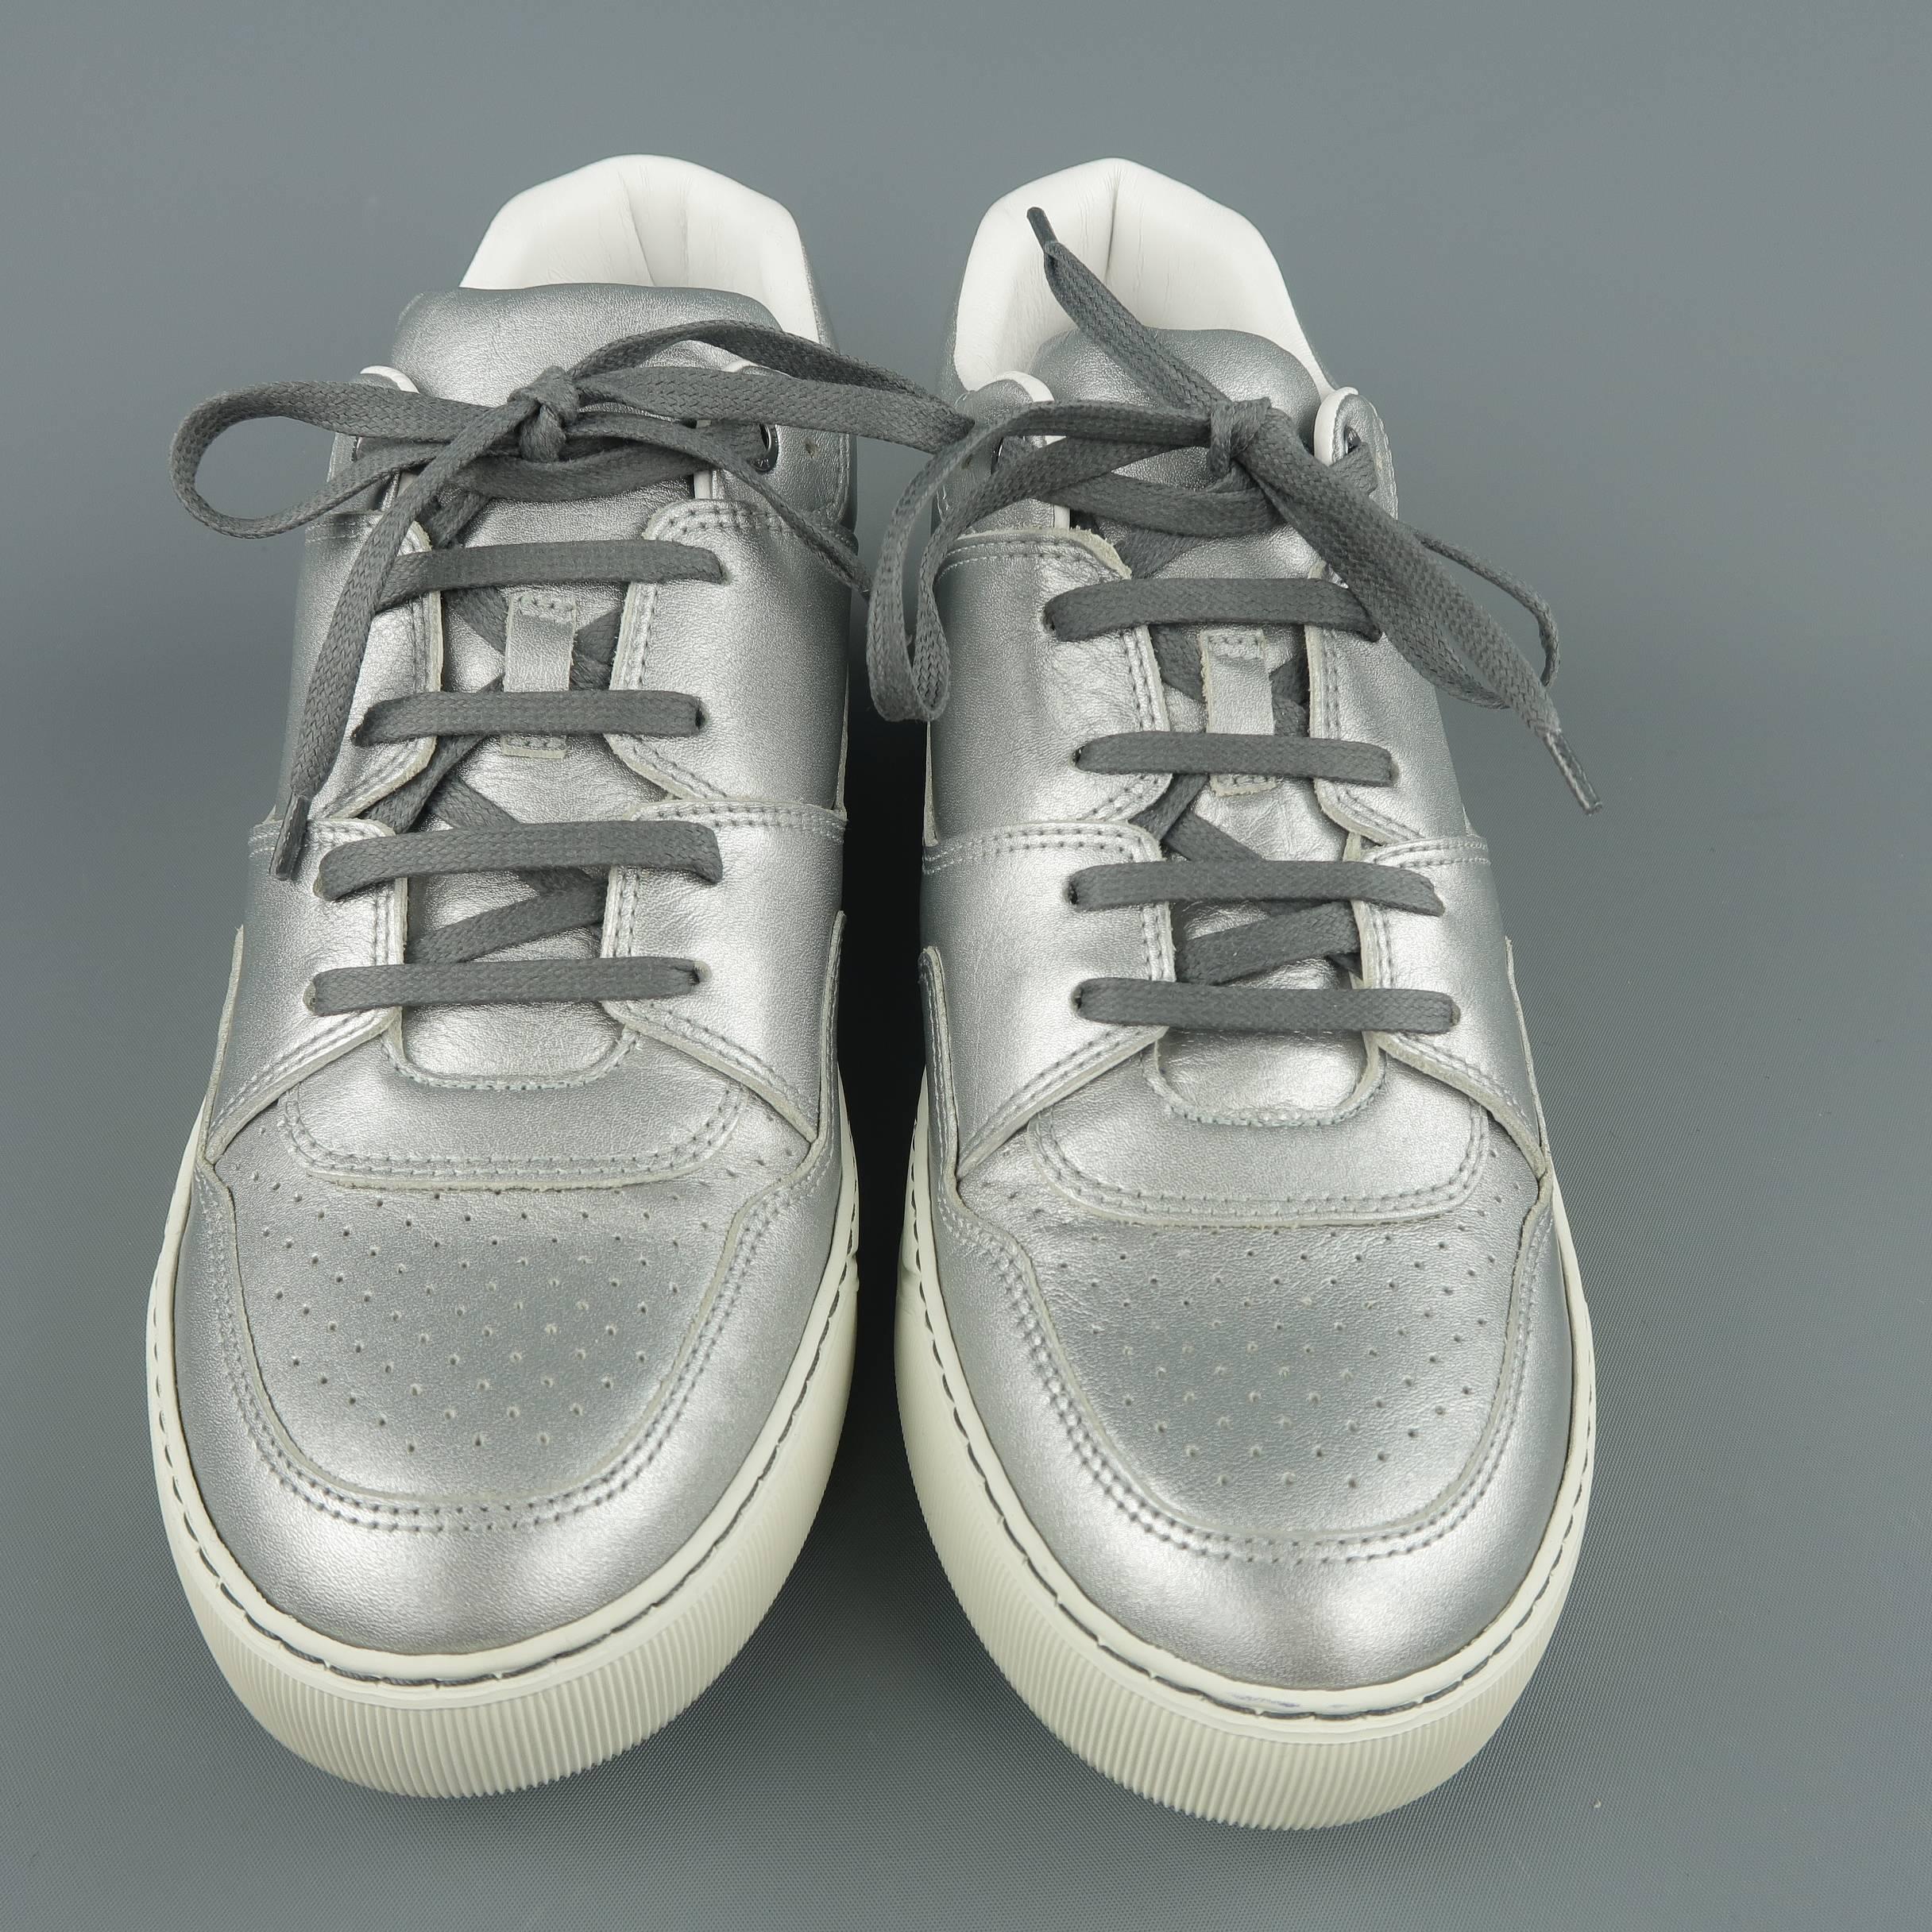 LANVIN mid sneakers come in metallic silver leather with a perforated toe panel and thick off white rubber sole. Made in Portugal.
 
New in Box.
Marked: UK 7
 
Outsole: 11.45 x 4 in.
